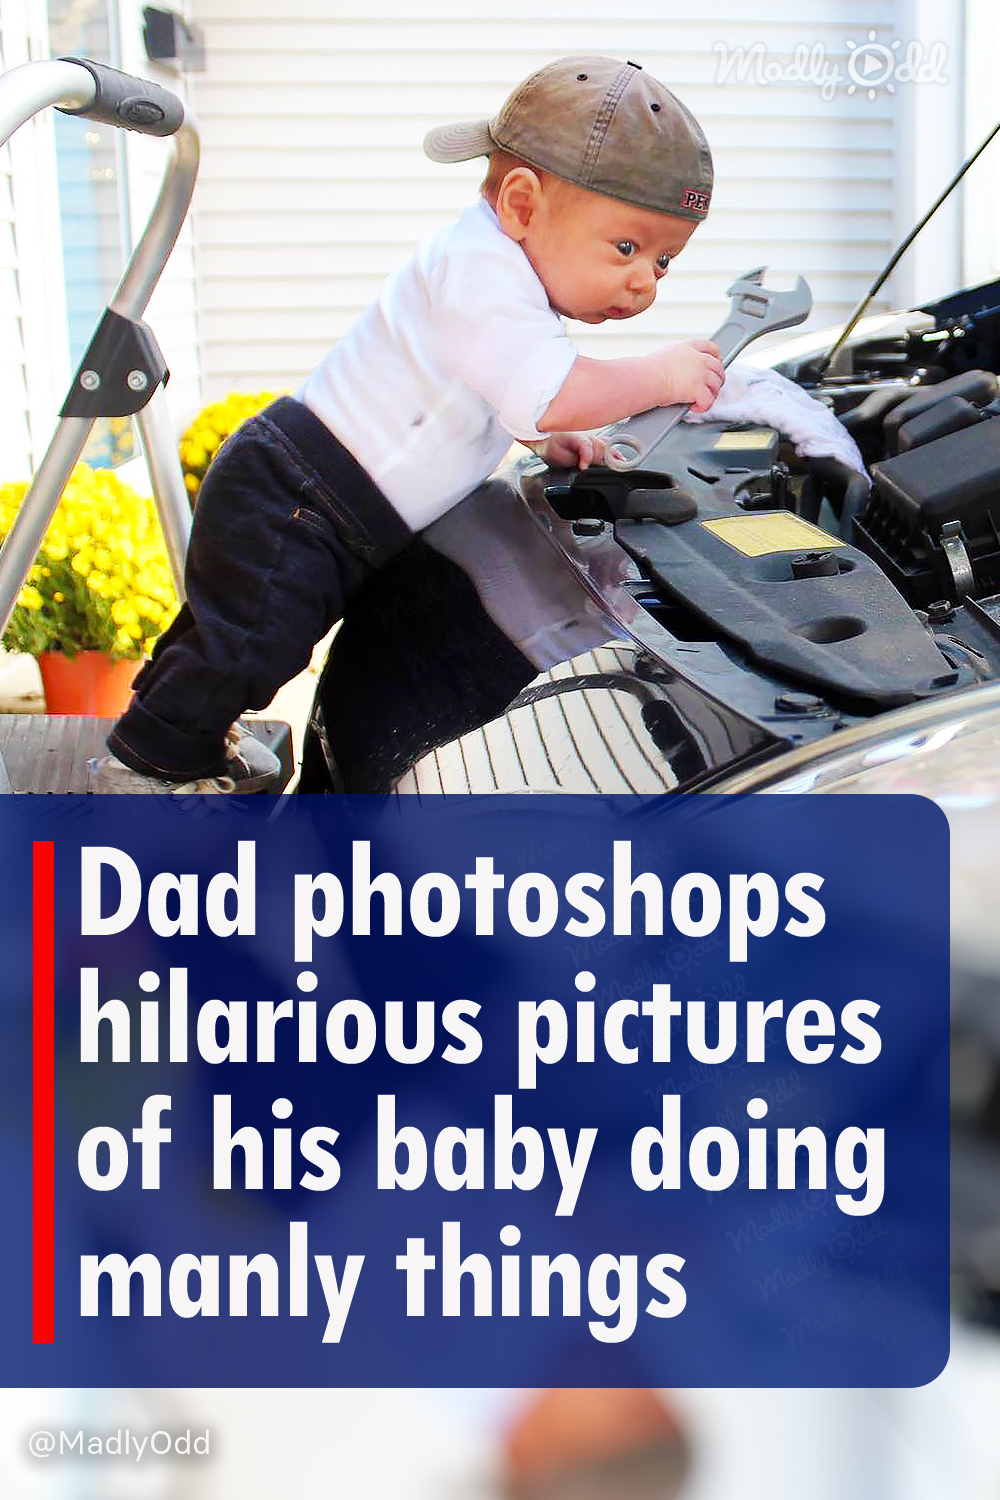 Dad photoshops hilarious pictures of his baby doing manly things